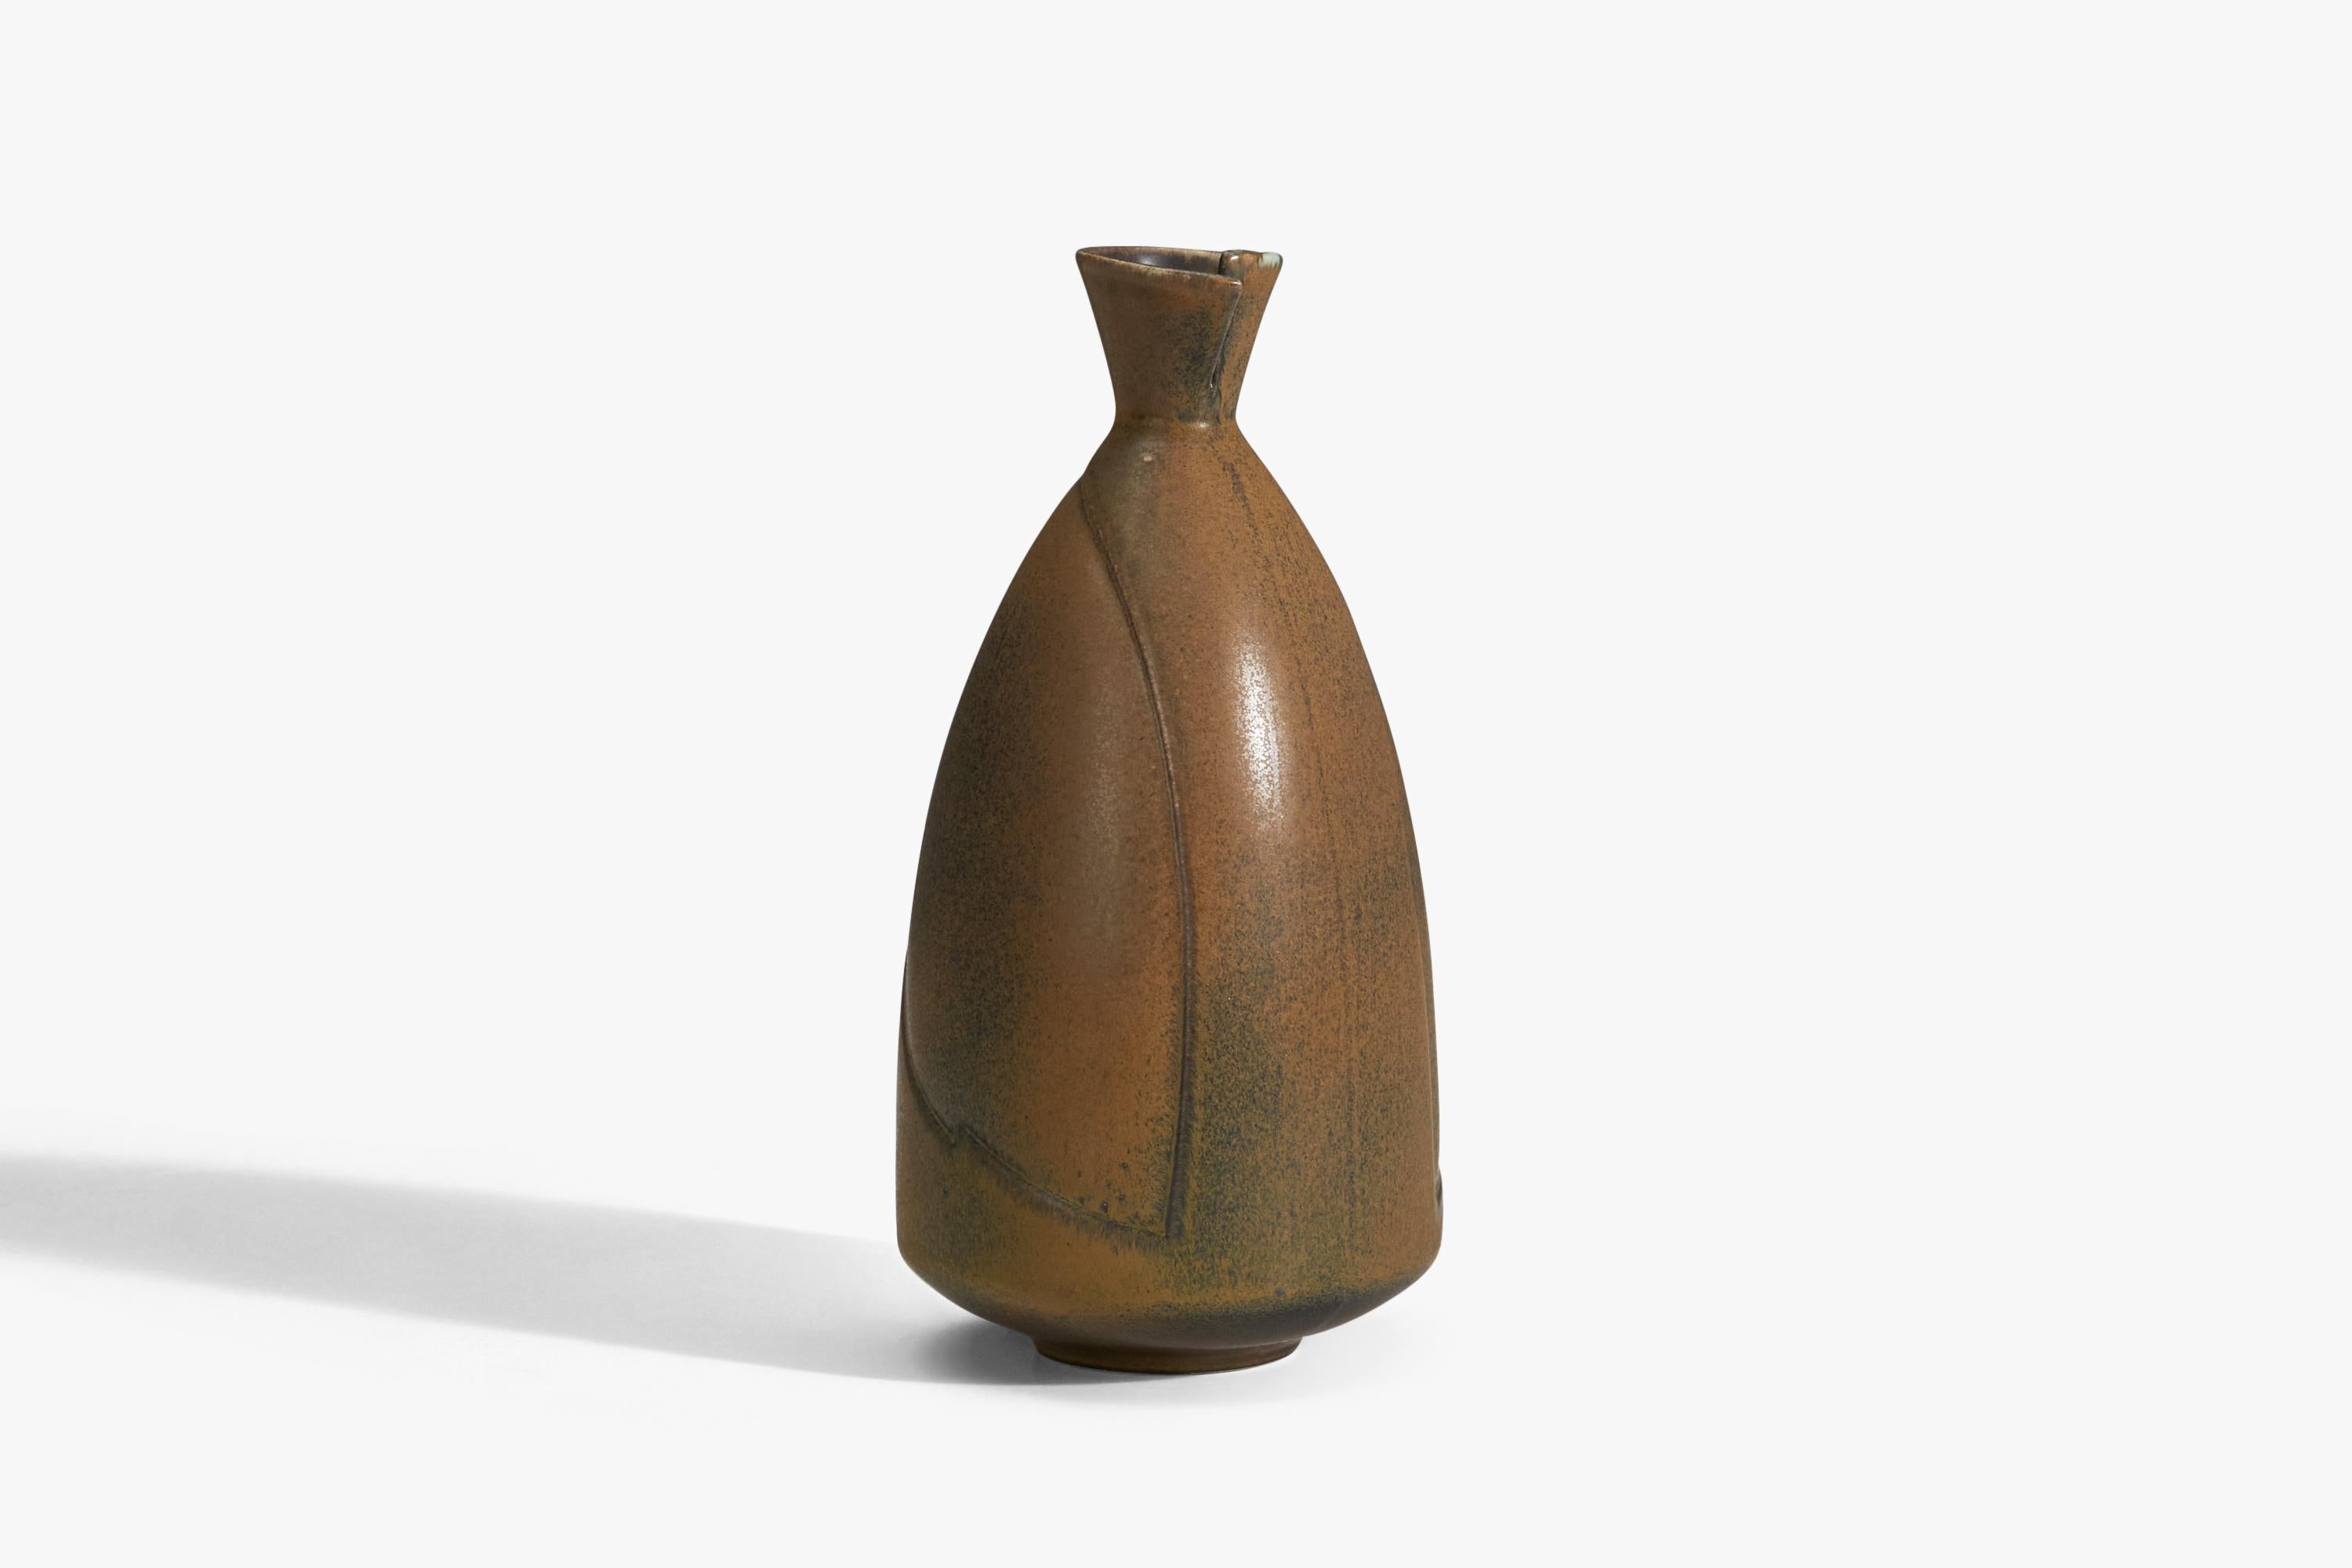 A brown glazed stoneware vase designed by Gabi Citron Tengbom and produced by Gustavsberg, Sweden, 1960s.